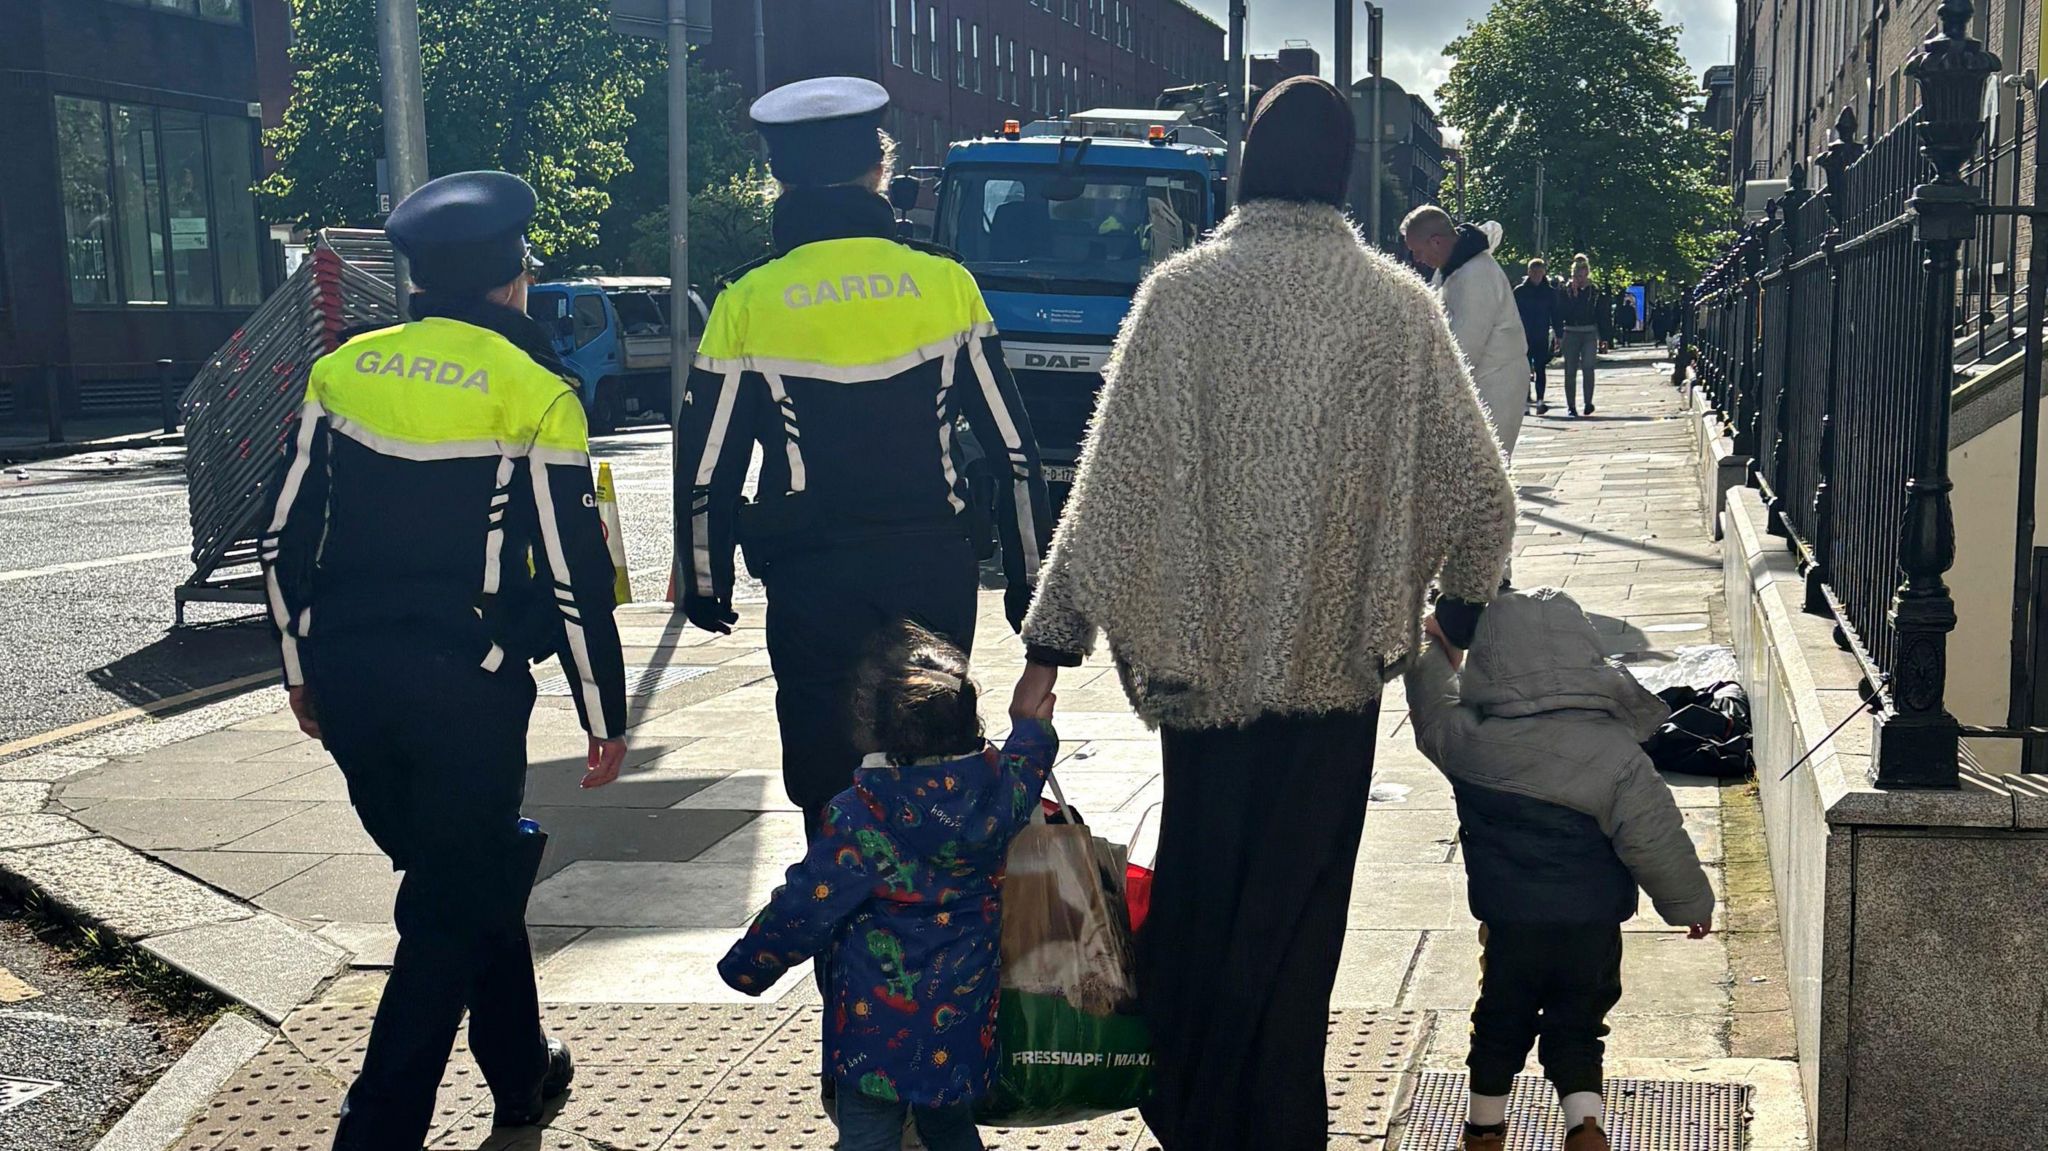 A woman walks with two children escorted by gardaí